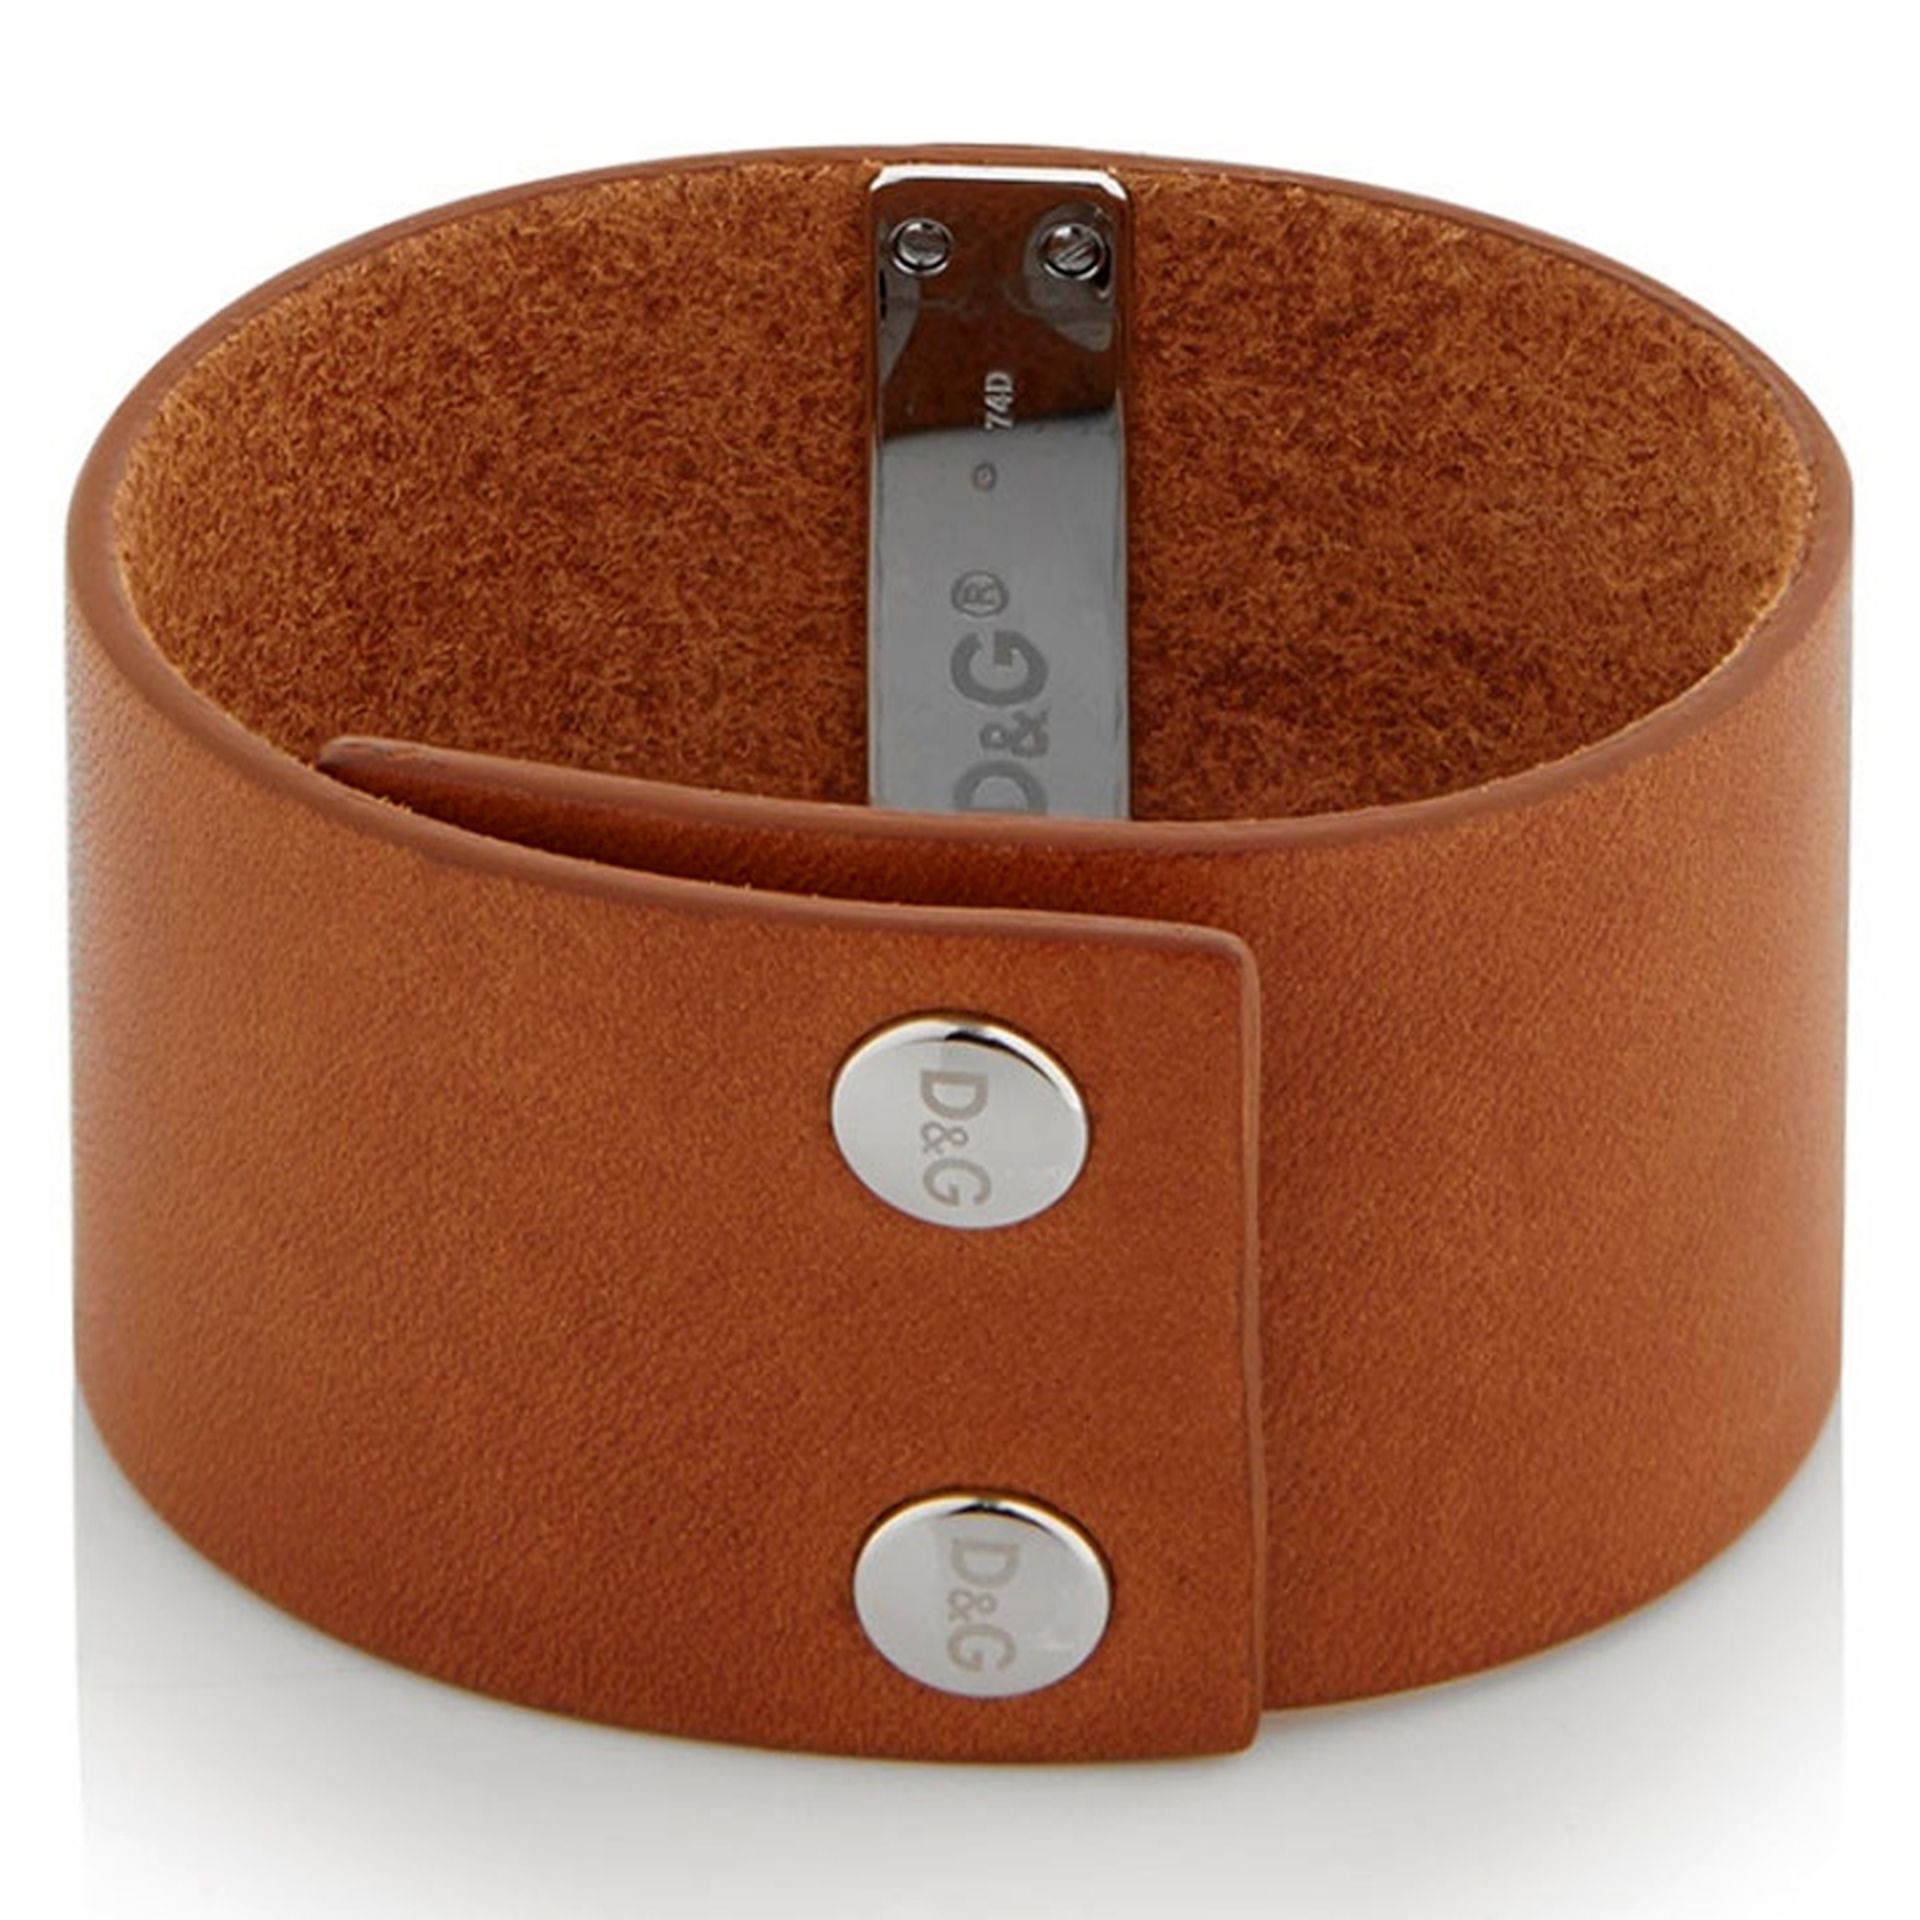 D&G wristband made from dark brown leather.- RRP £89 - Brand New & Boxed - Image 2 of 3